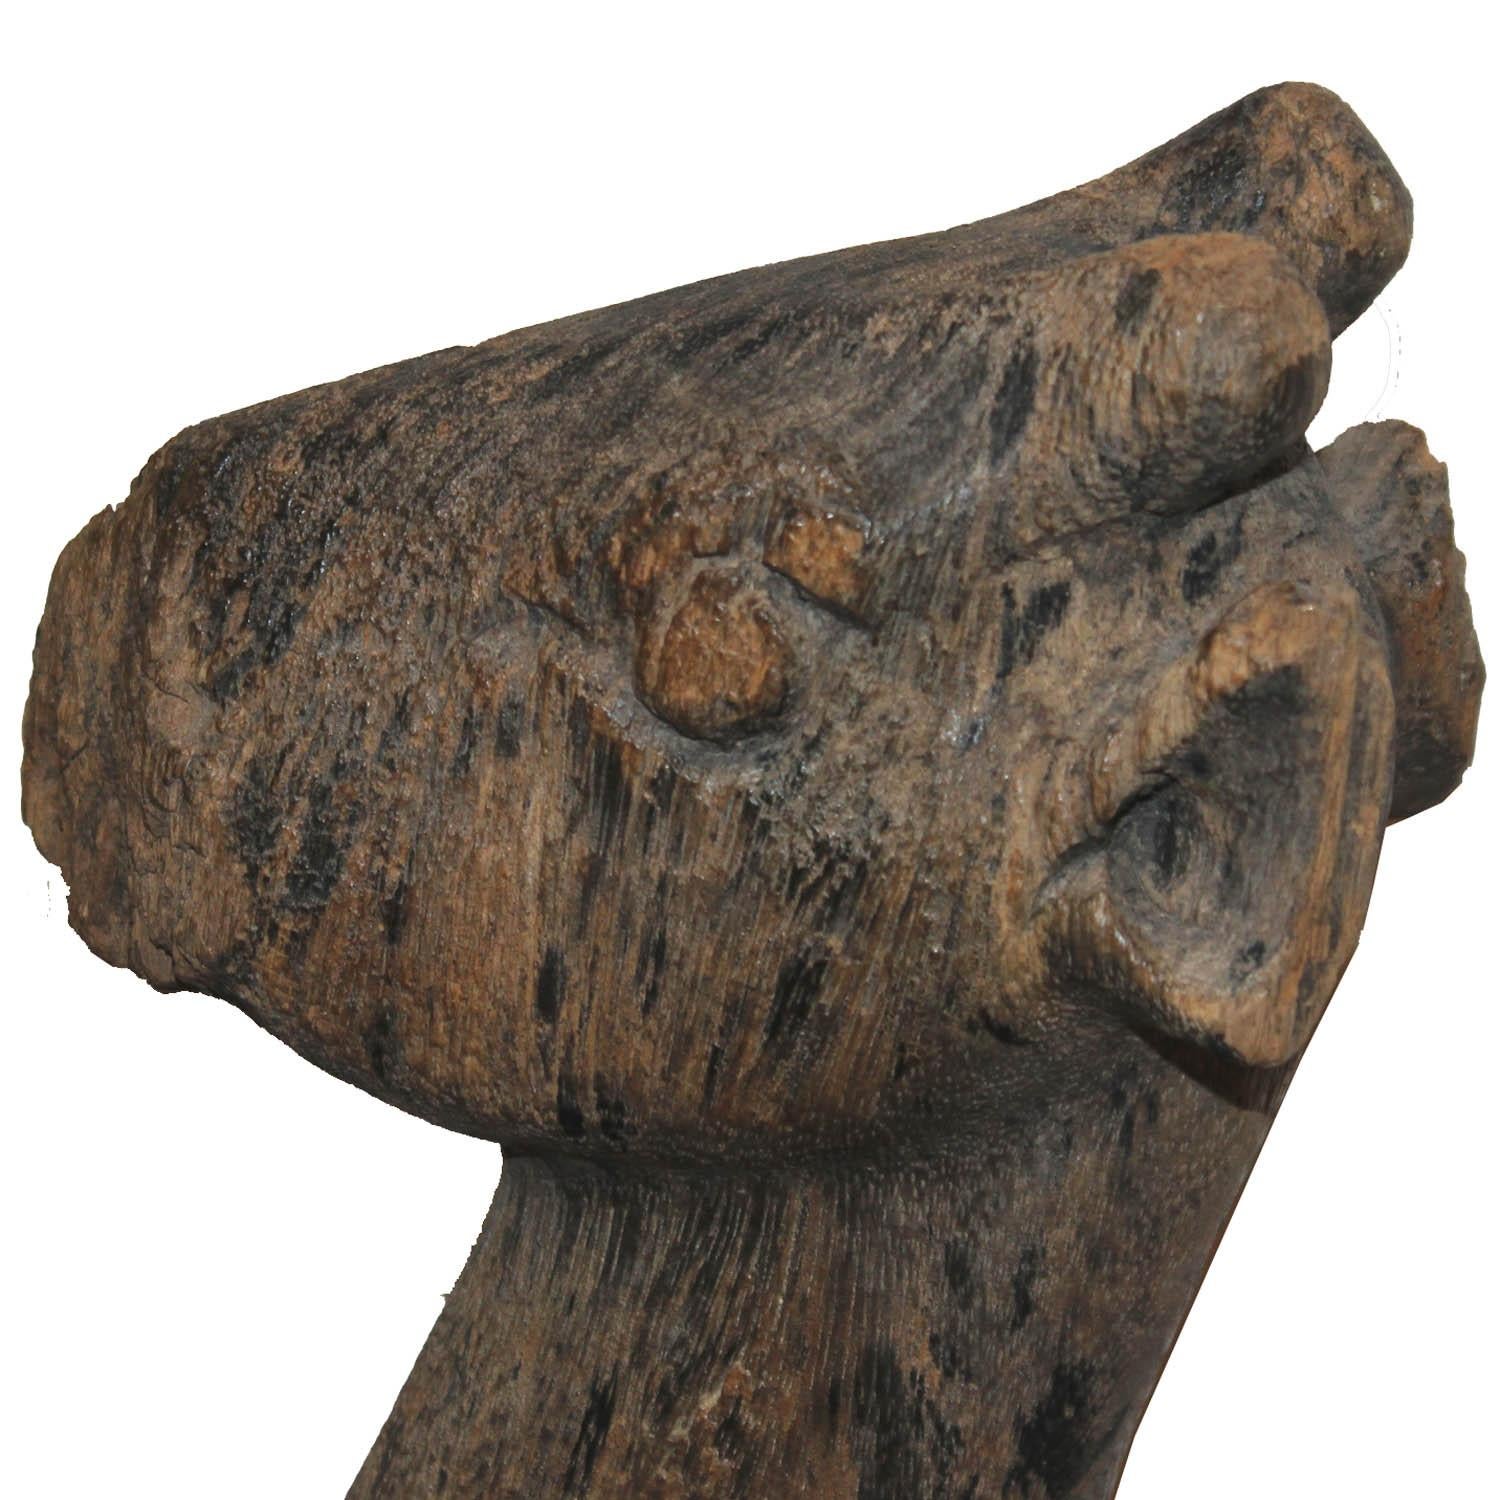 19th century seated wood deer from the Makon Valley in Laos. Hand carved deer, eroded over time, makes an interesting accessory for a bookshelf or coffee table.

